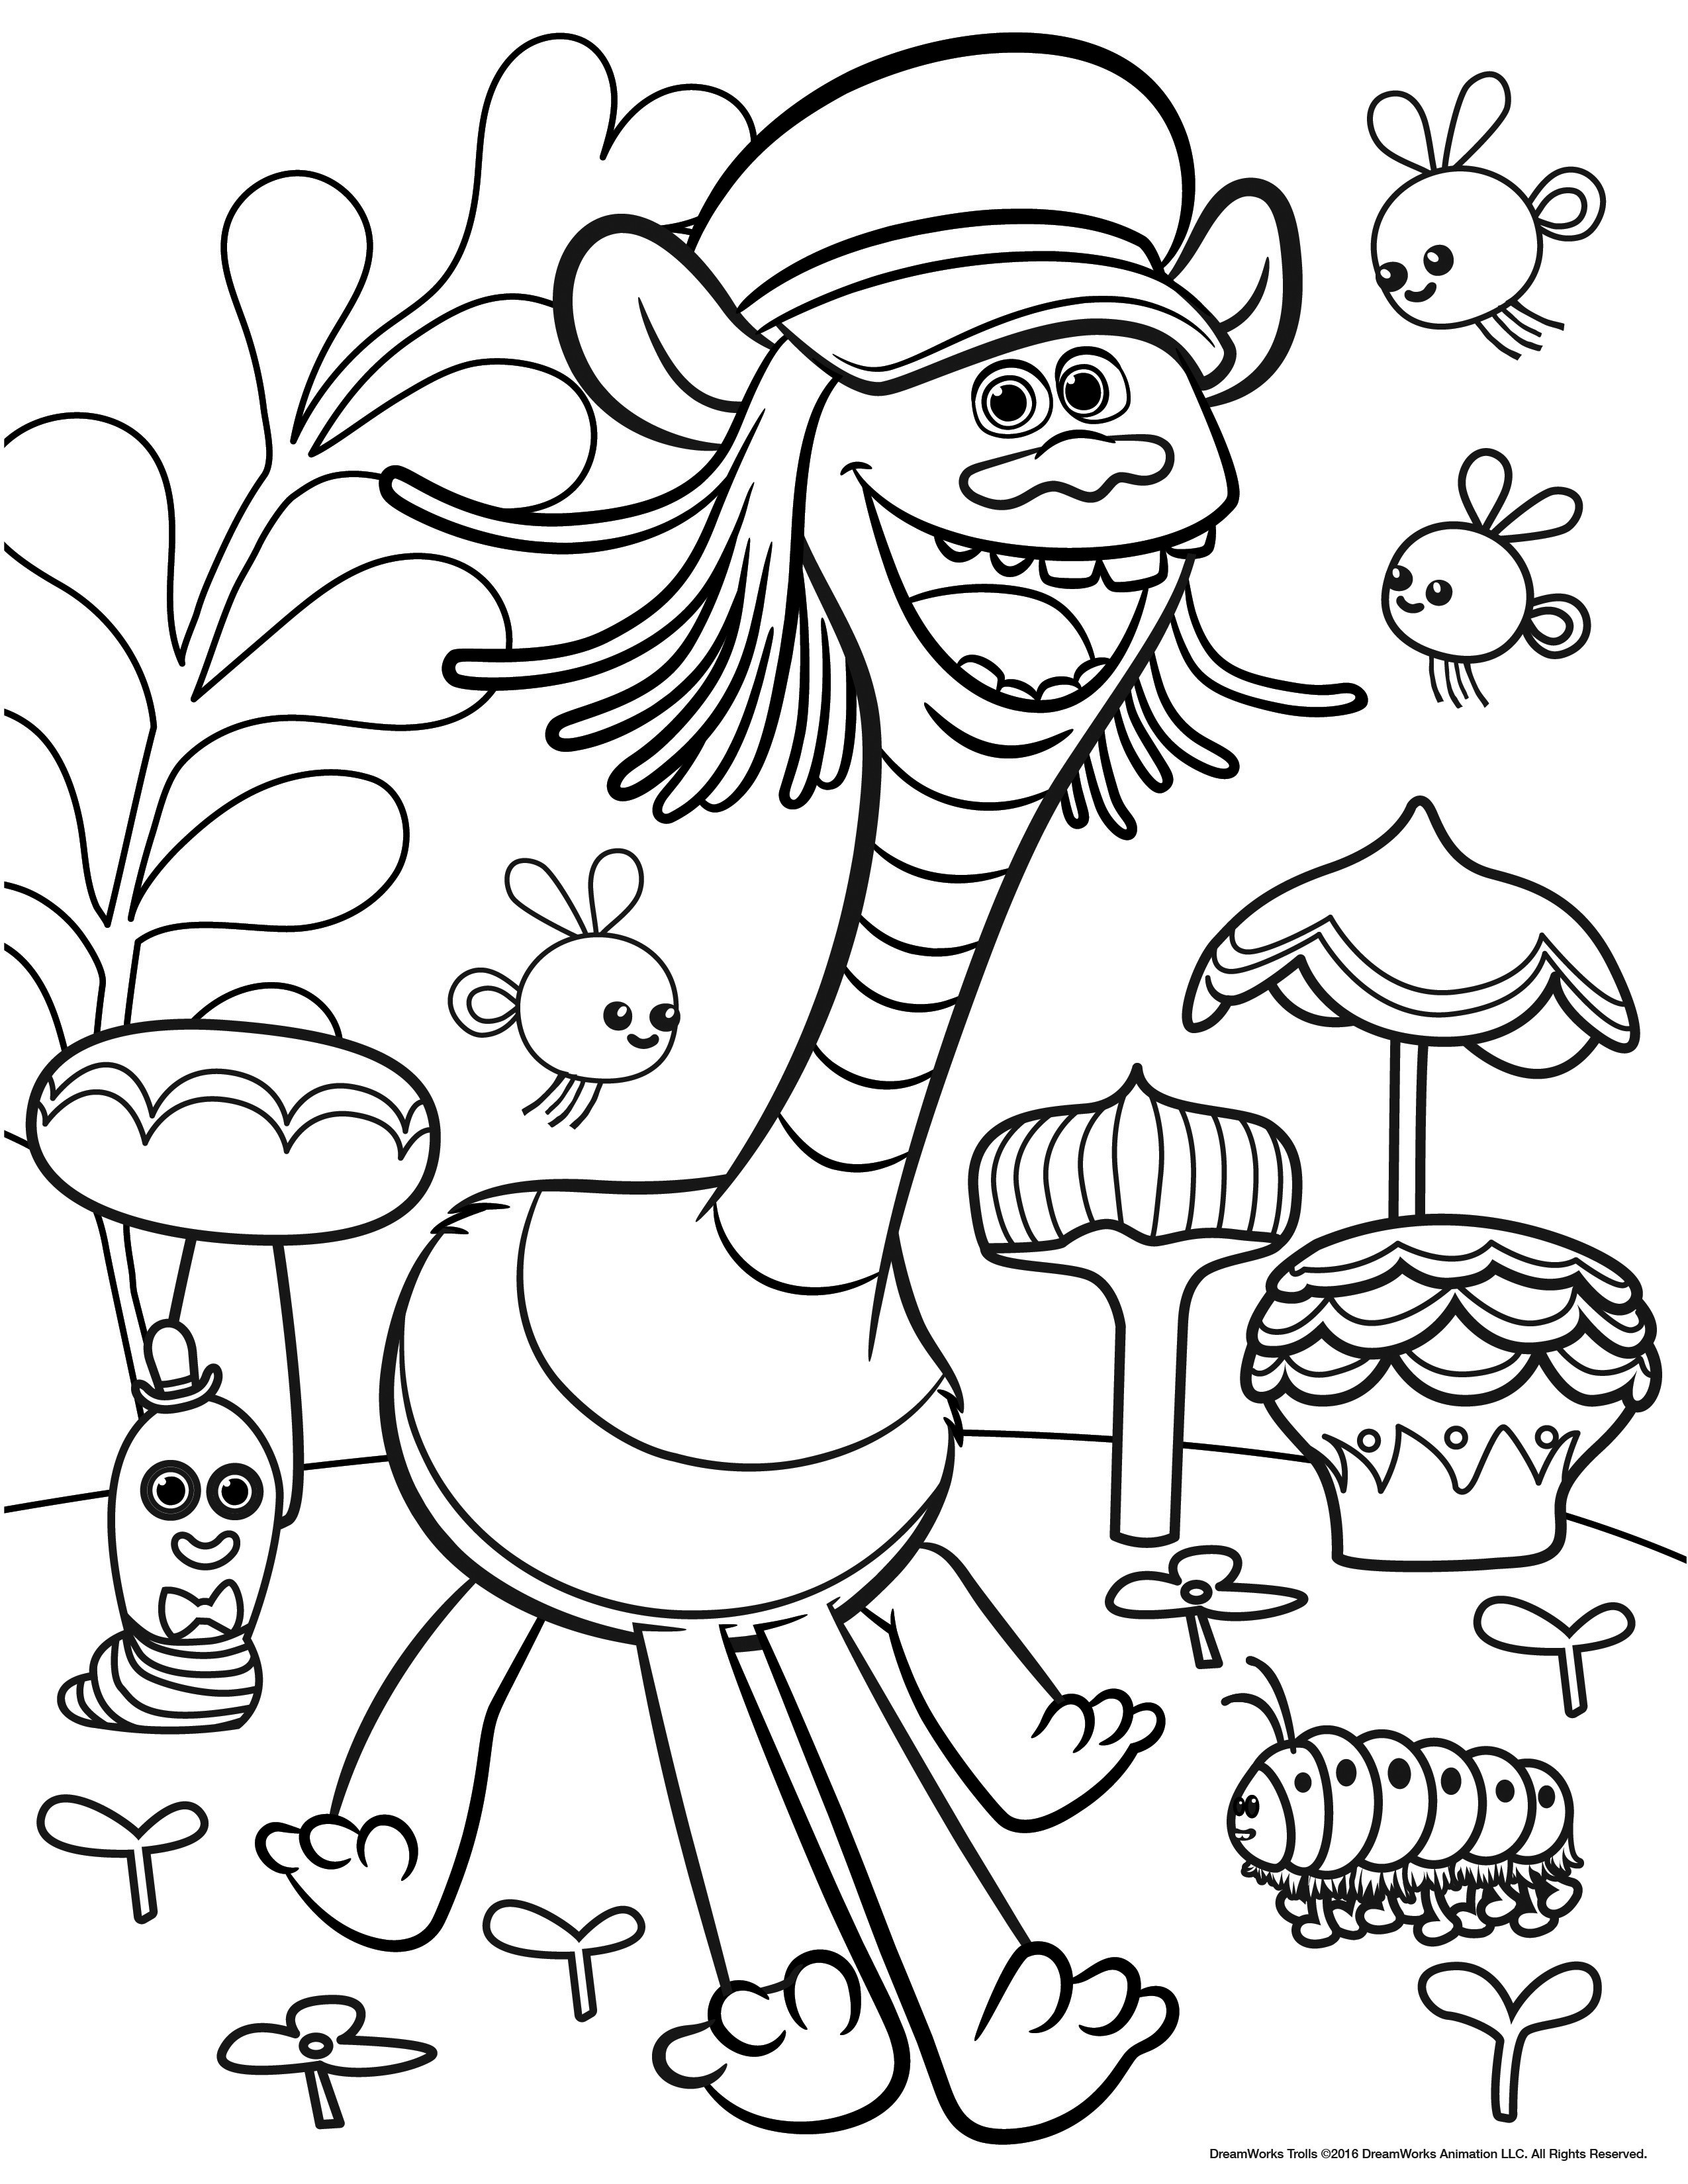 Trolls to download for free - Trolls Kids Coloring Pages